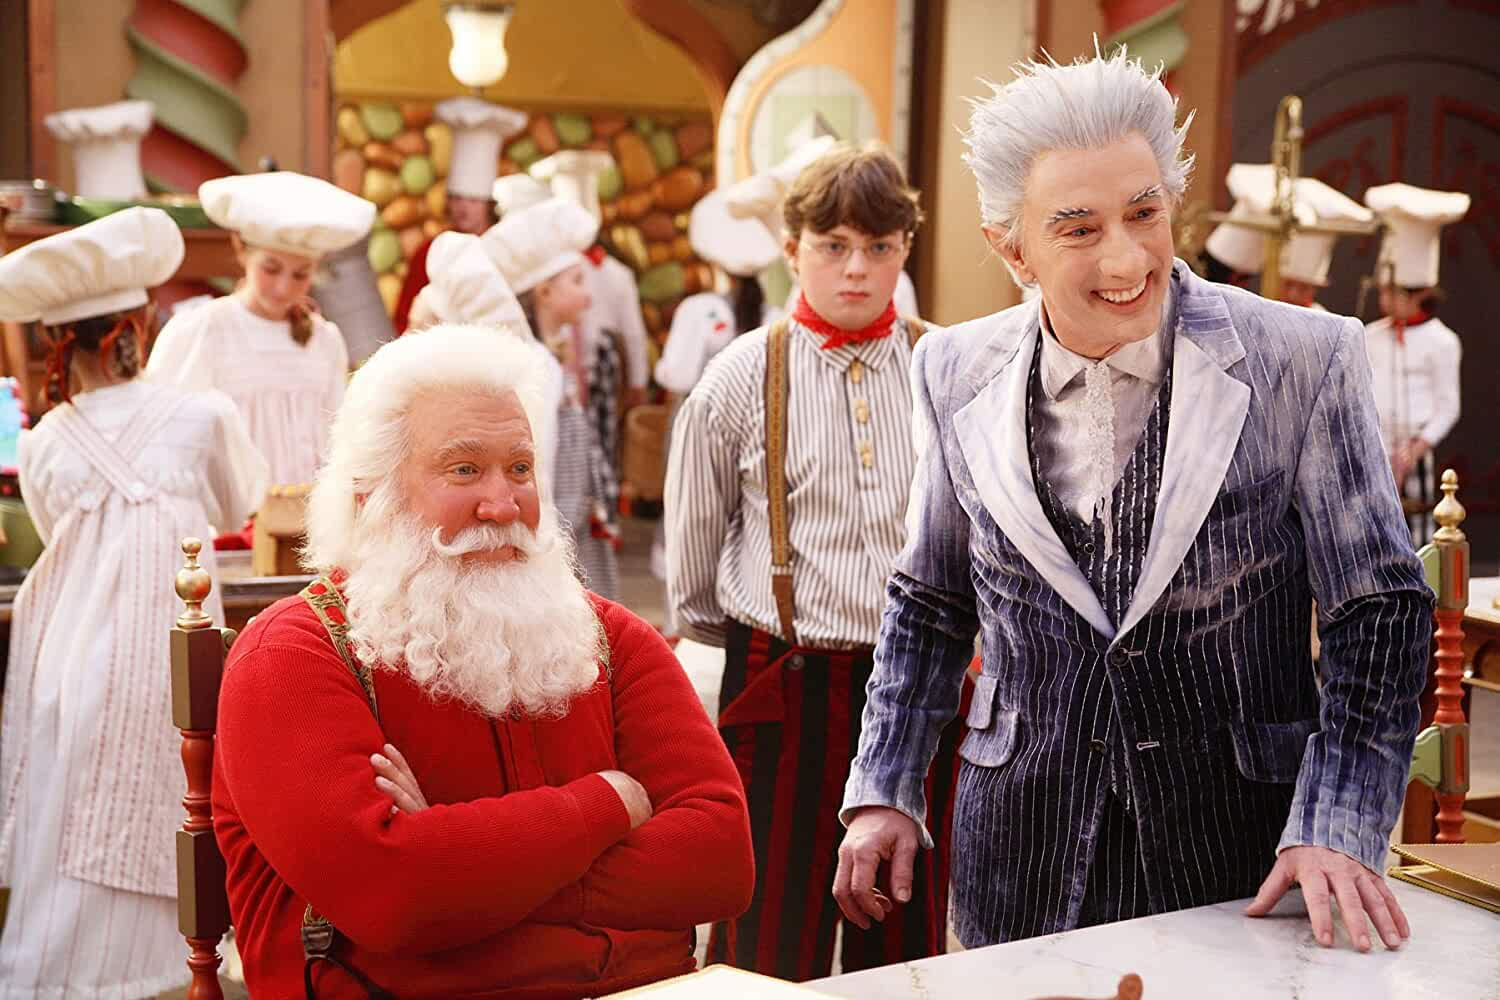 A scene from The Santa Clause 3